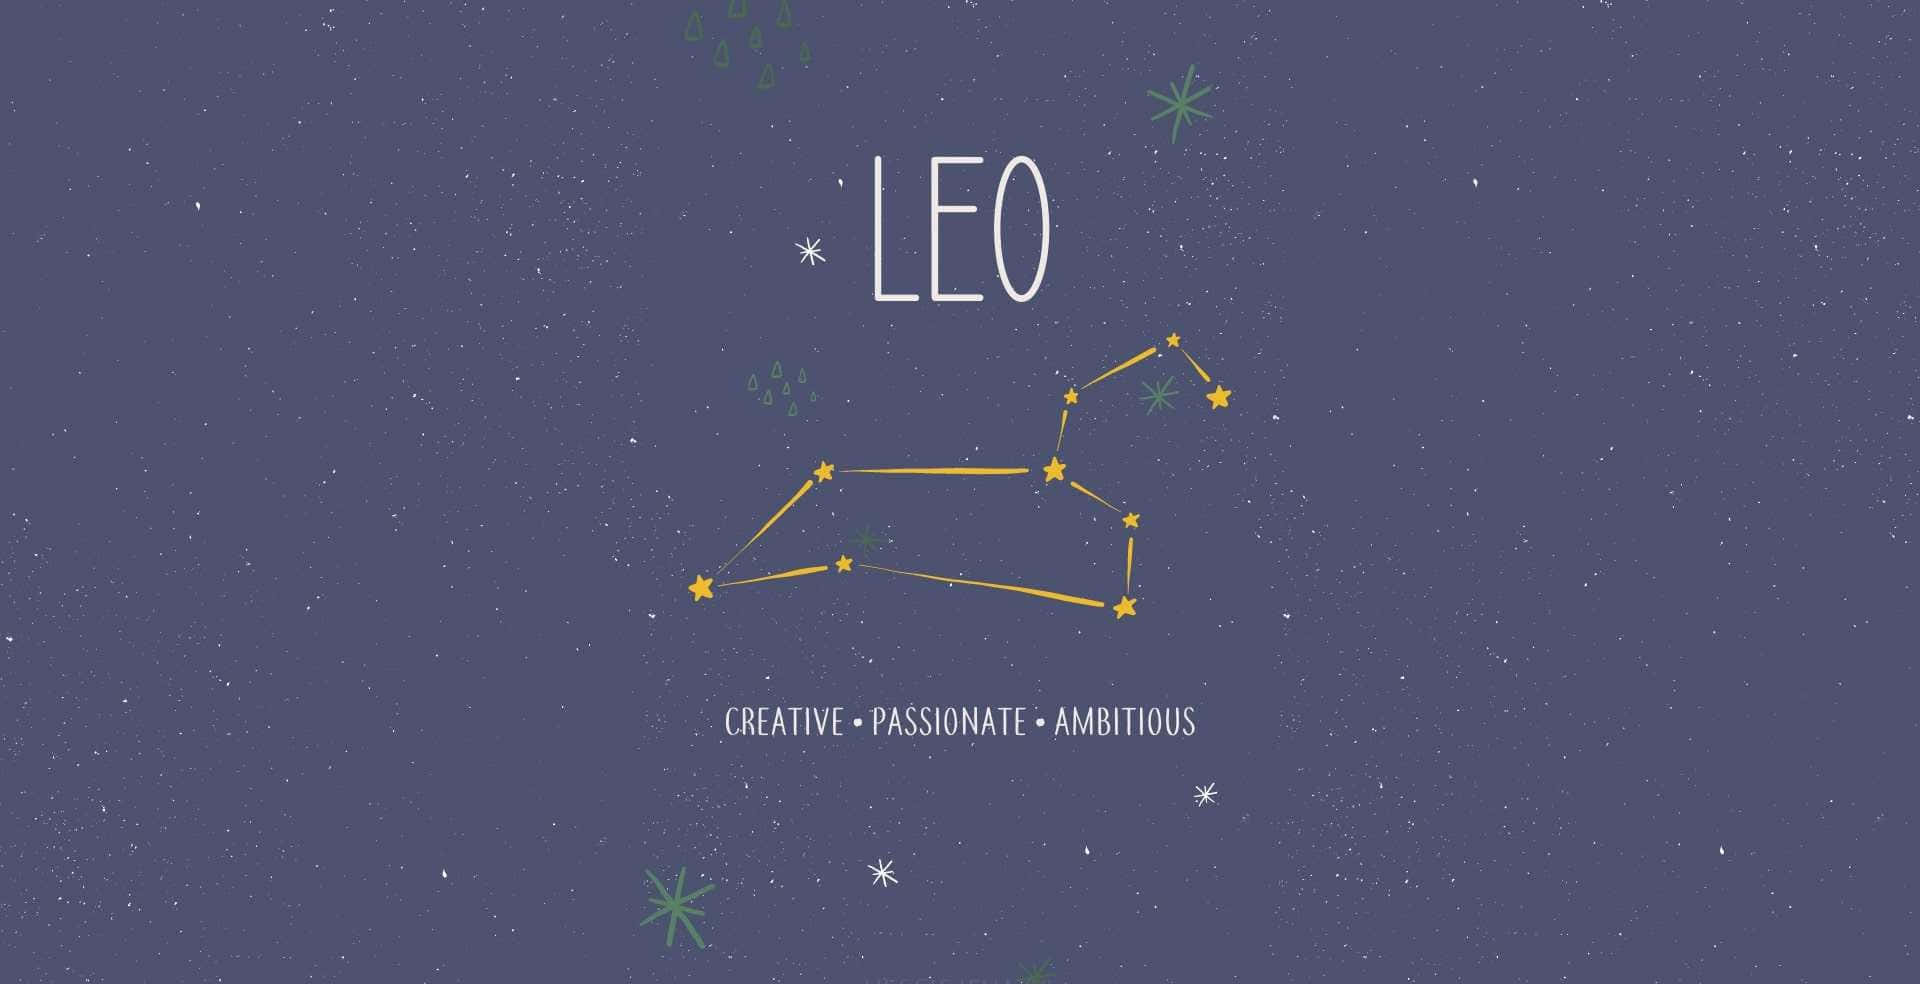 Majestic Leo constellation in the night sky